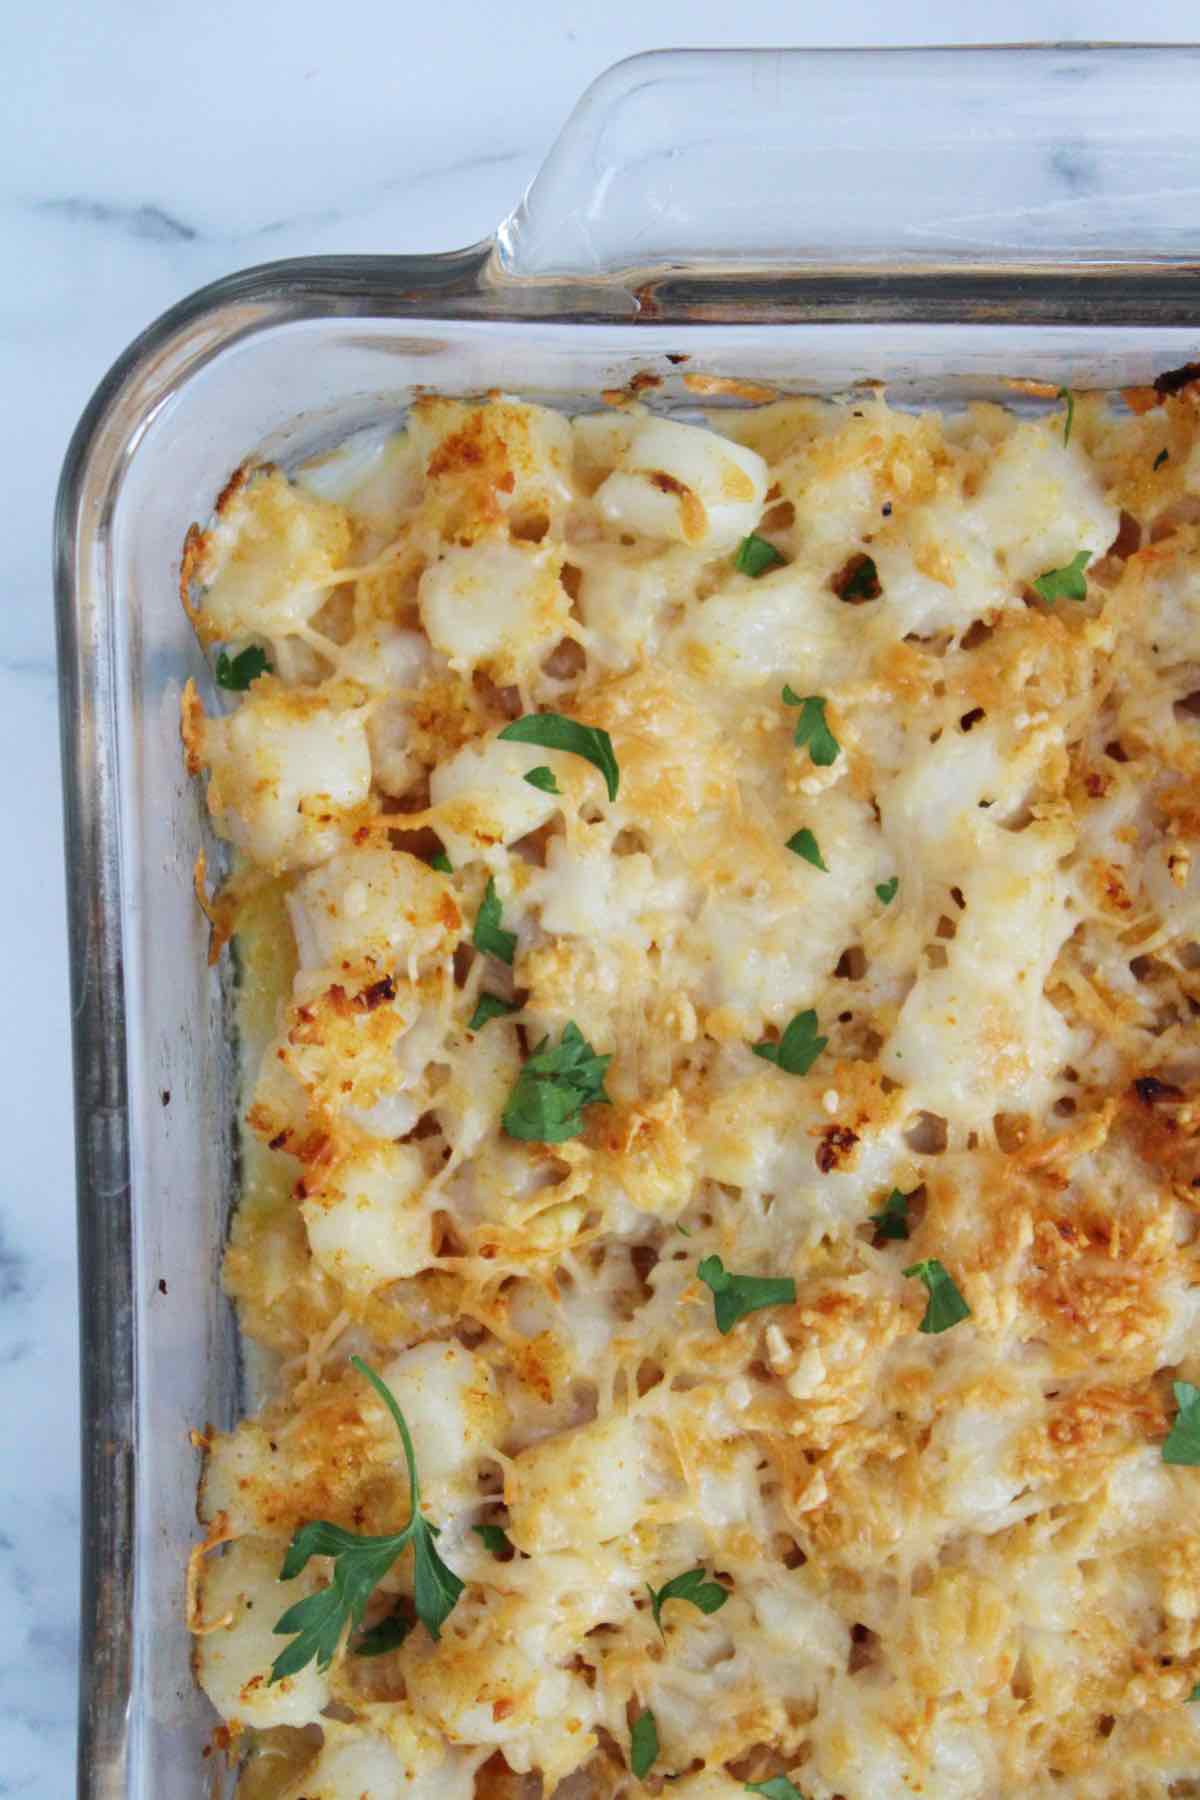 This recipe for baked cheesy scallops is made in under 20 minutes.